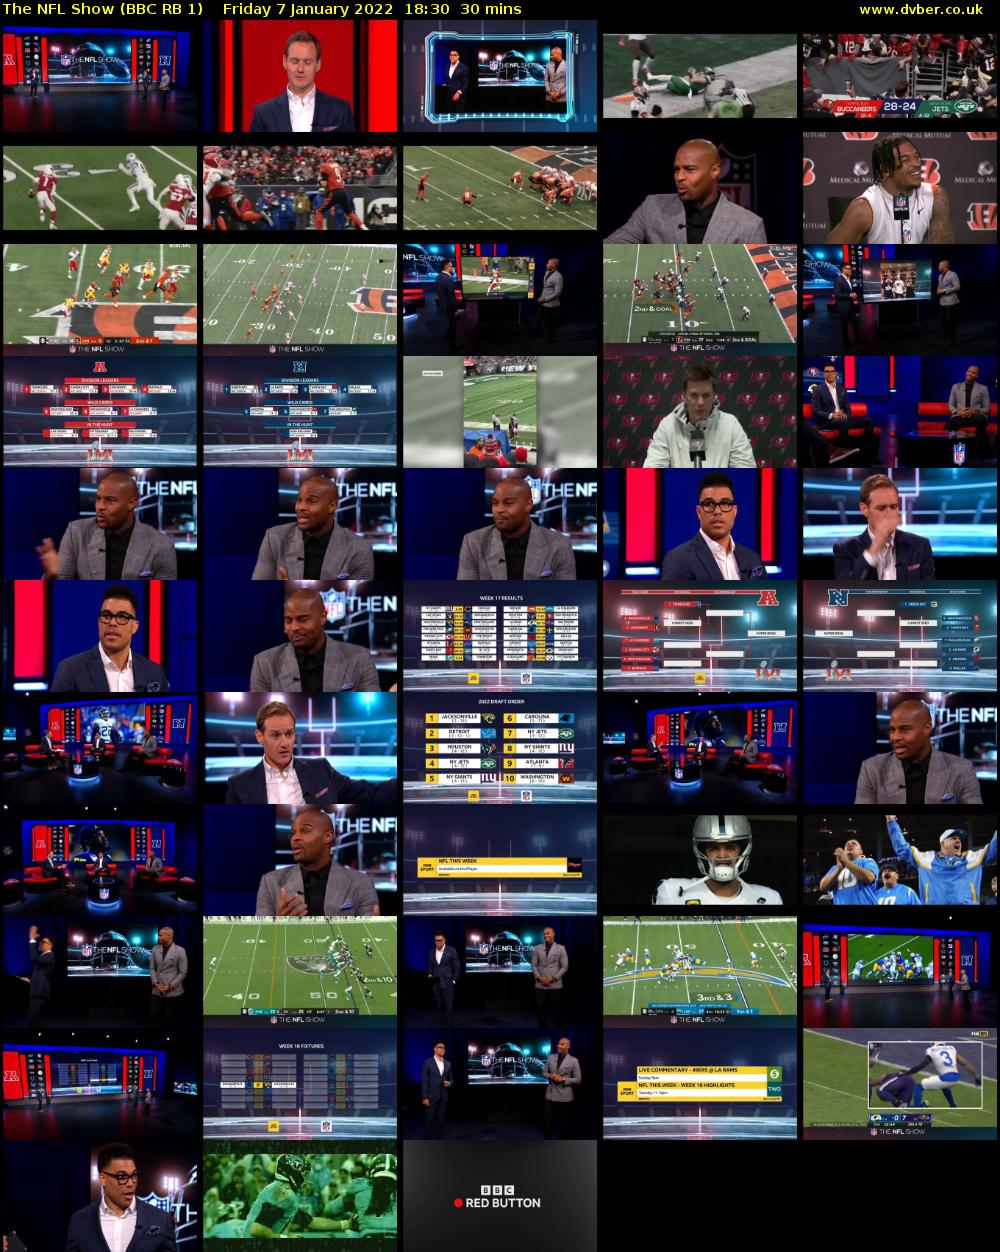 The NFL Show (BBC RB 1) Friday 7 January 2022 18:30 - 19:00